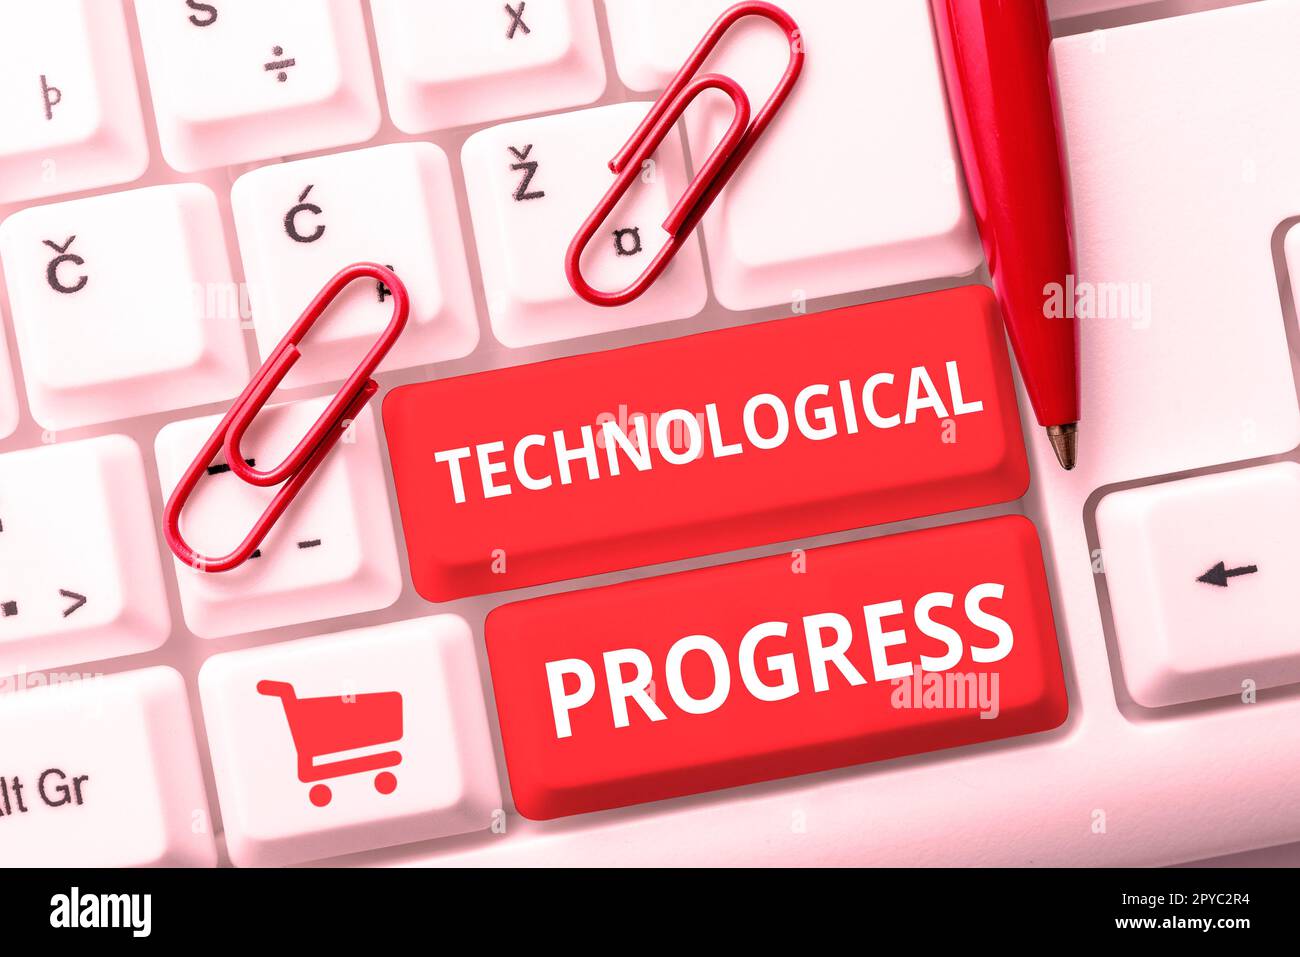 Text caption presenting Technological Progress. Word Written on overall Process of Invention Innovation Diffusion Stock Photo